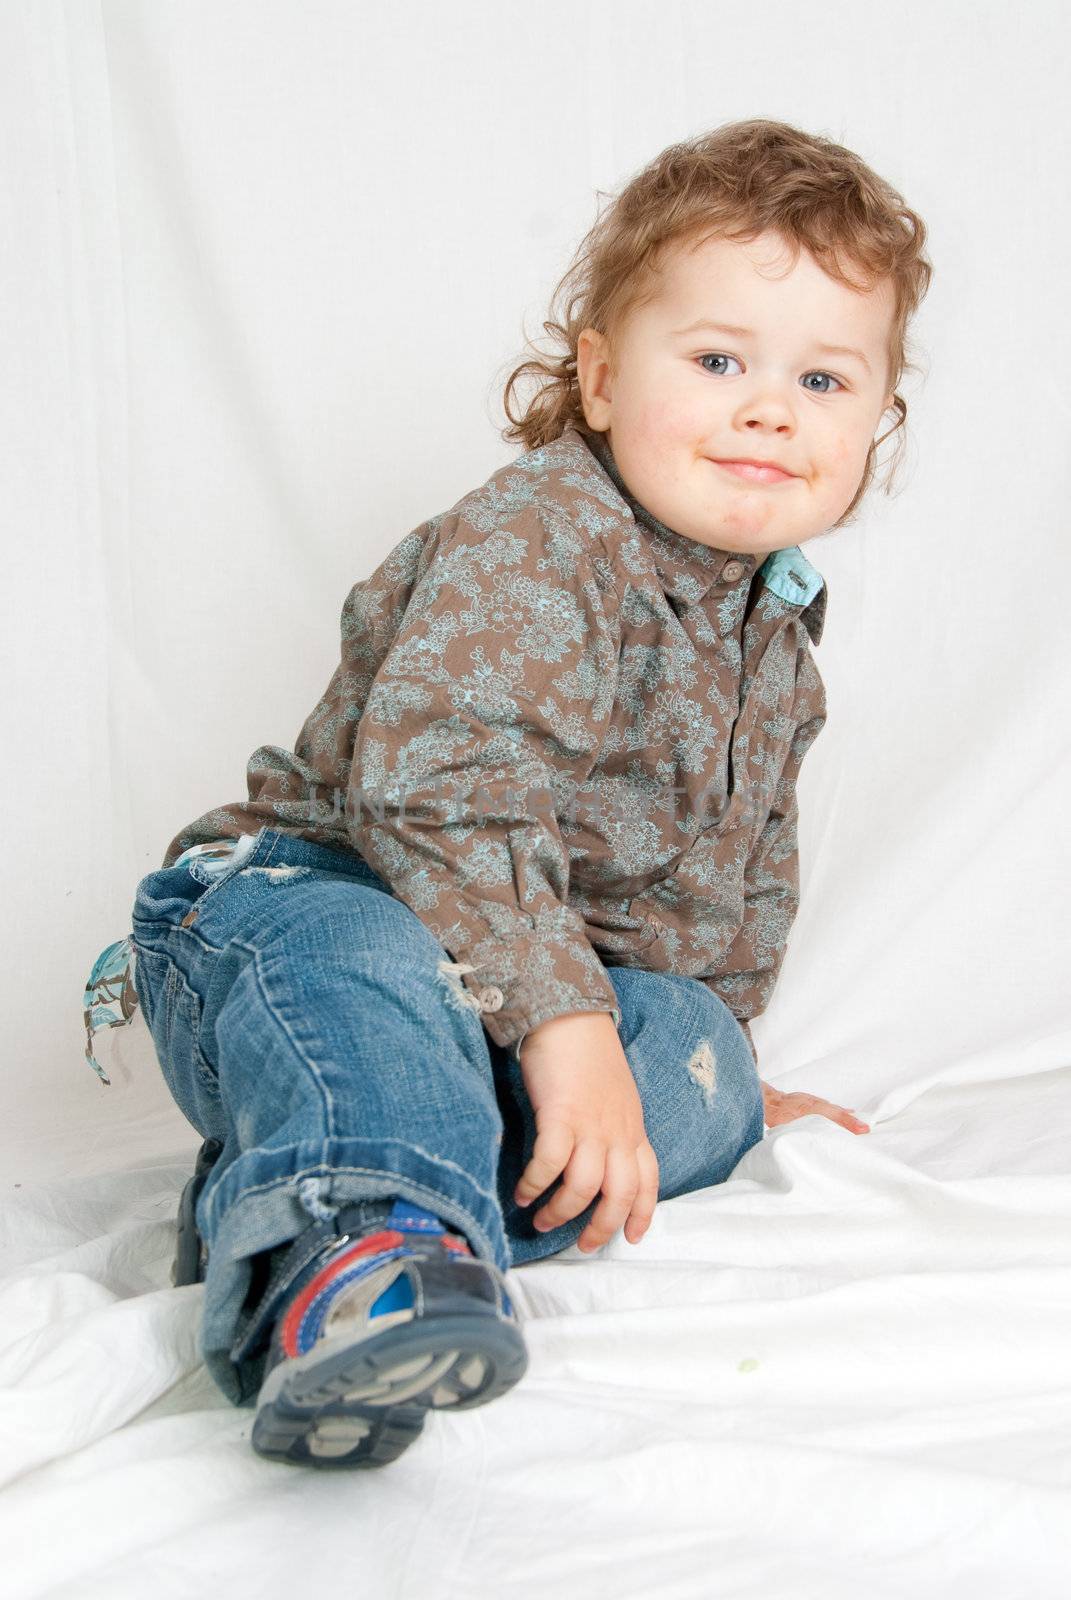 Portrait of 2 years old boy made in studio